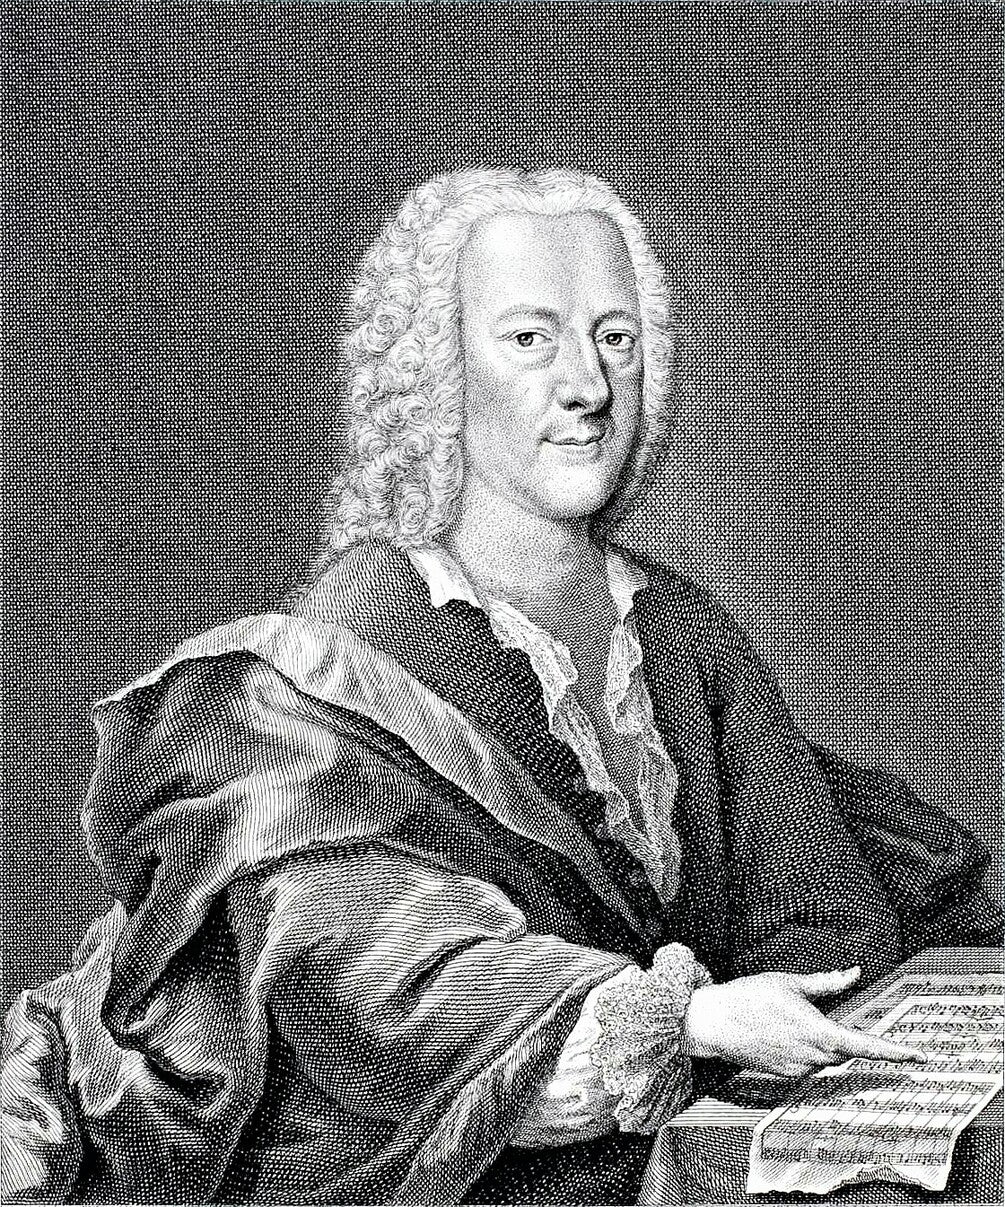 G.P. Telemann: Suite 'Gulliver's Travels' for 2 double basses (arranged by David Heyes)